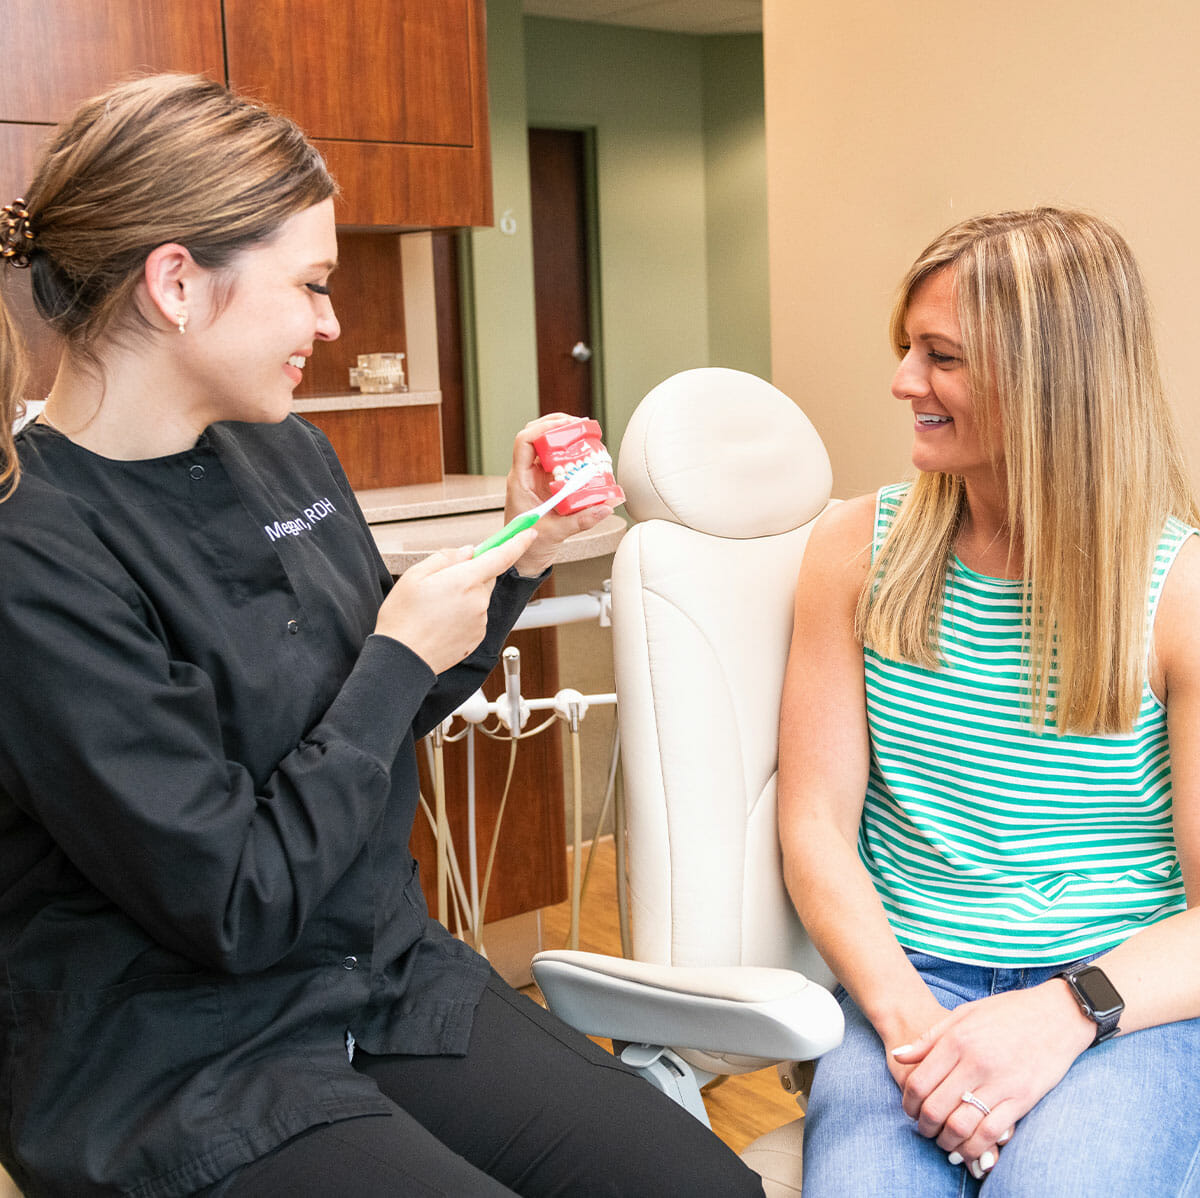 Dental hygienist demonstrating proper teeth brushing technique to patient